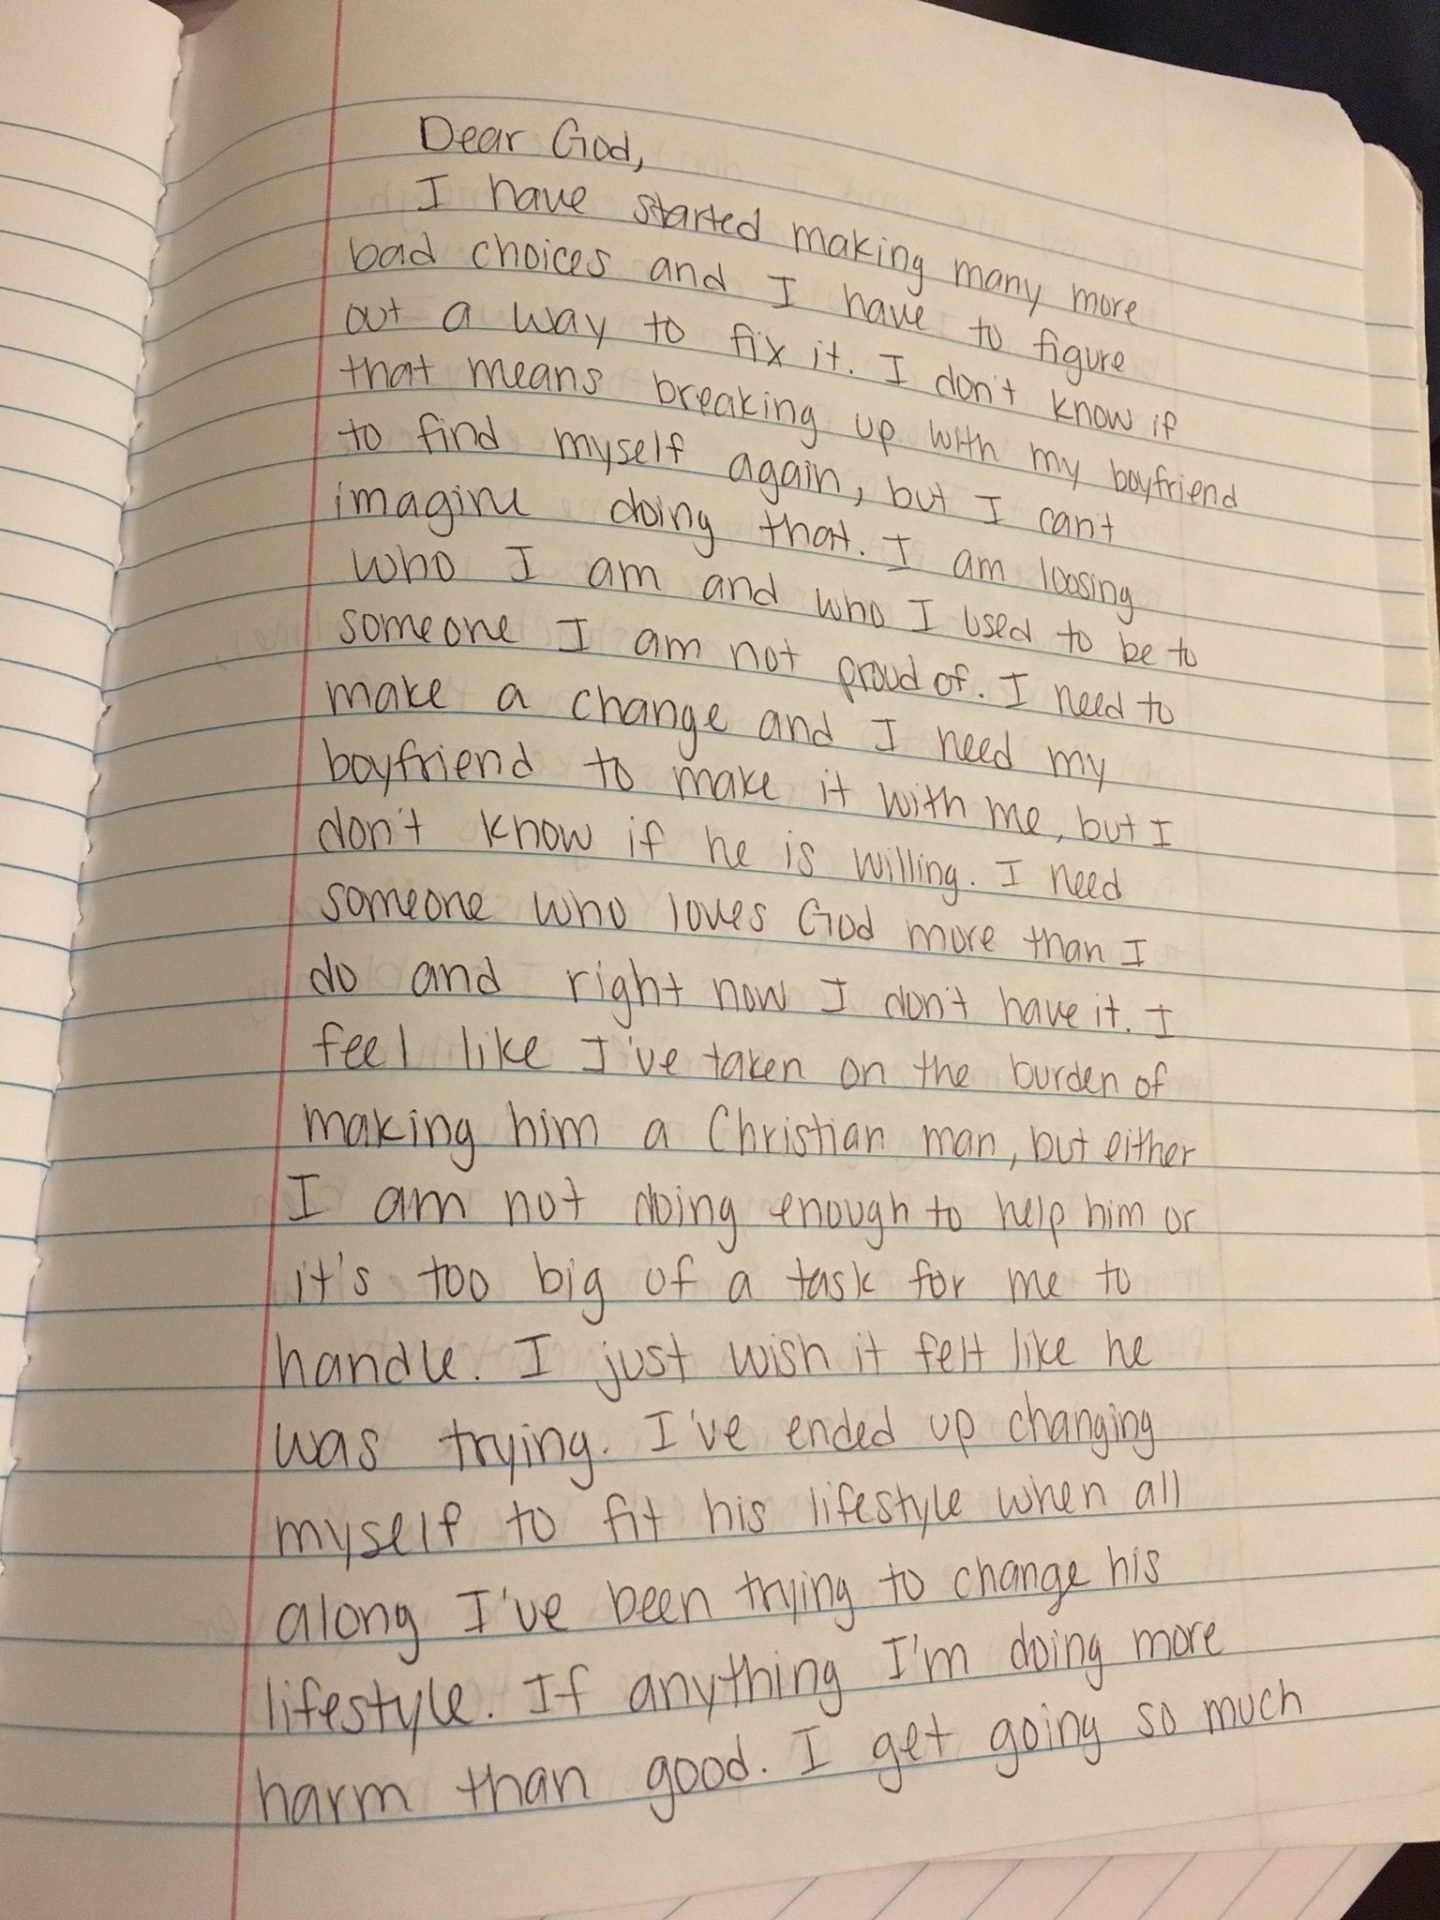 Teenage Girl Diary Entry about Love